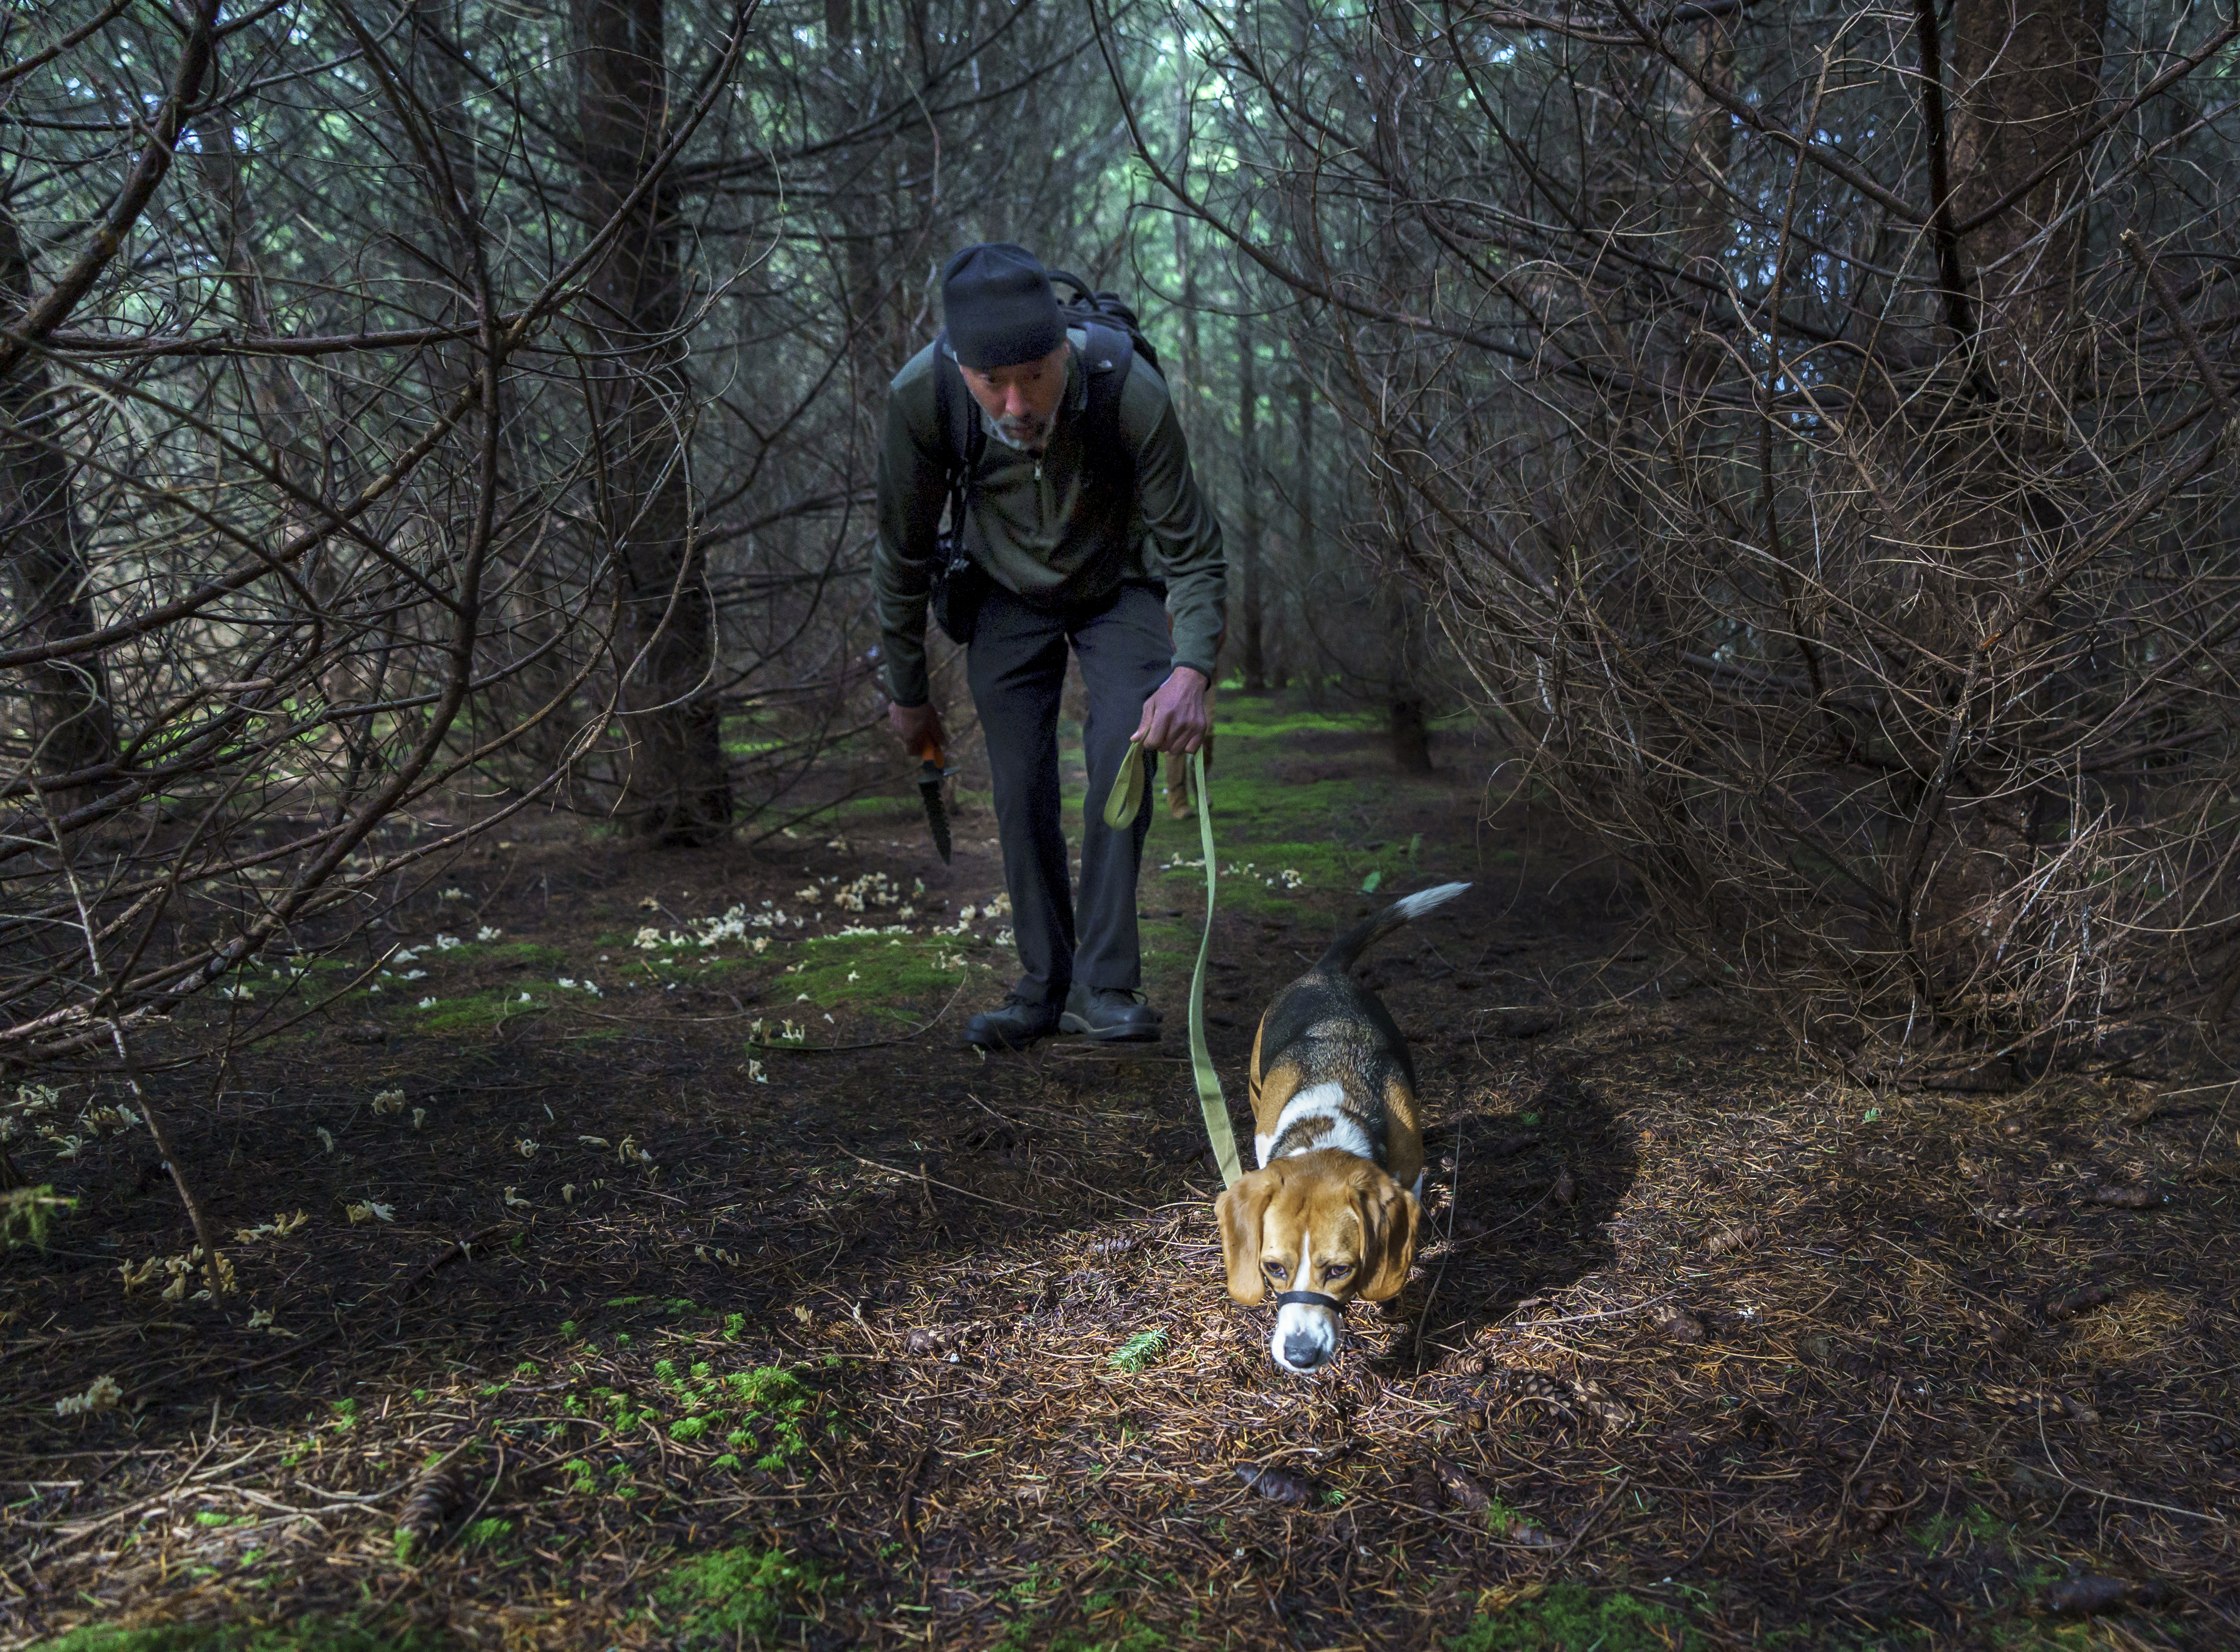 Oregon Mushers And Sled Dogs Share A Bond Forged In Miles - OPB